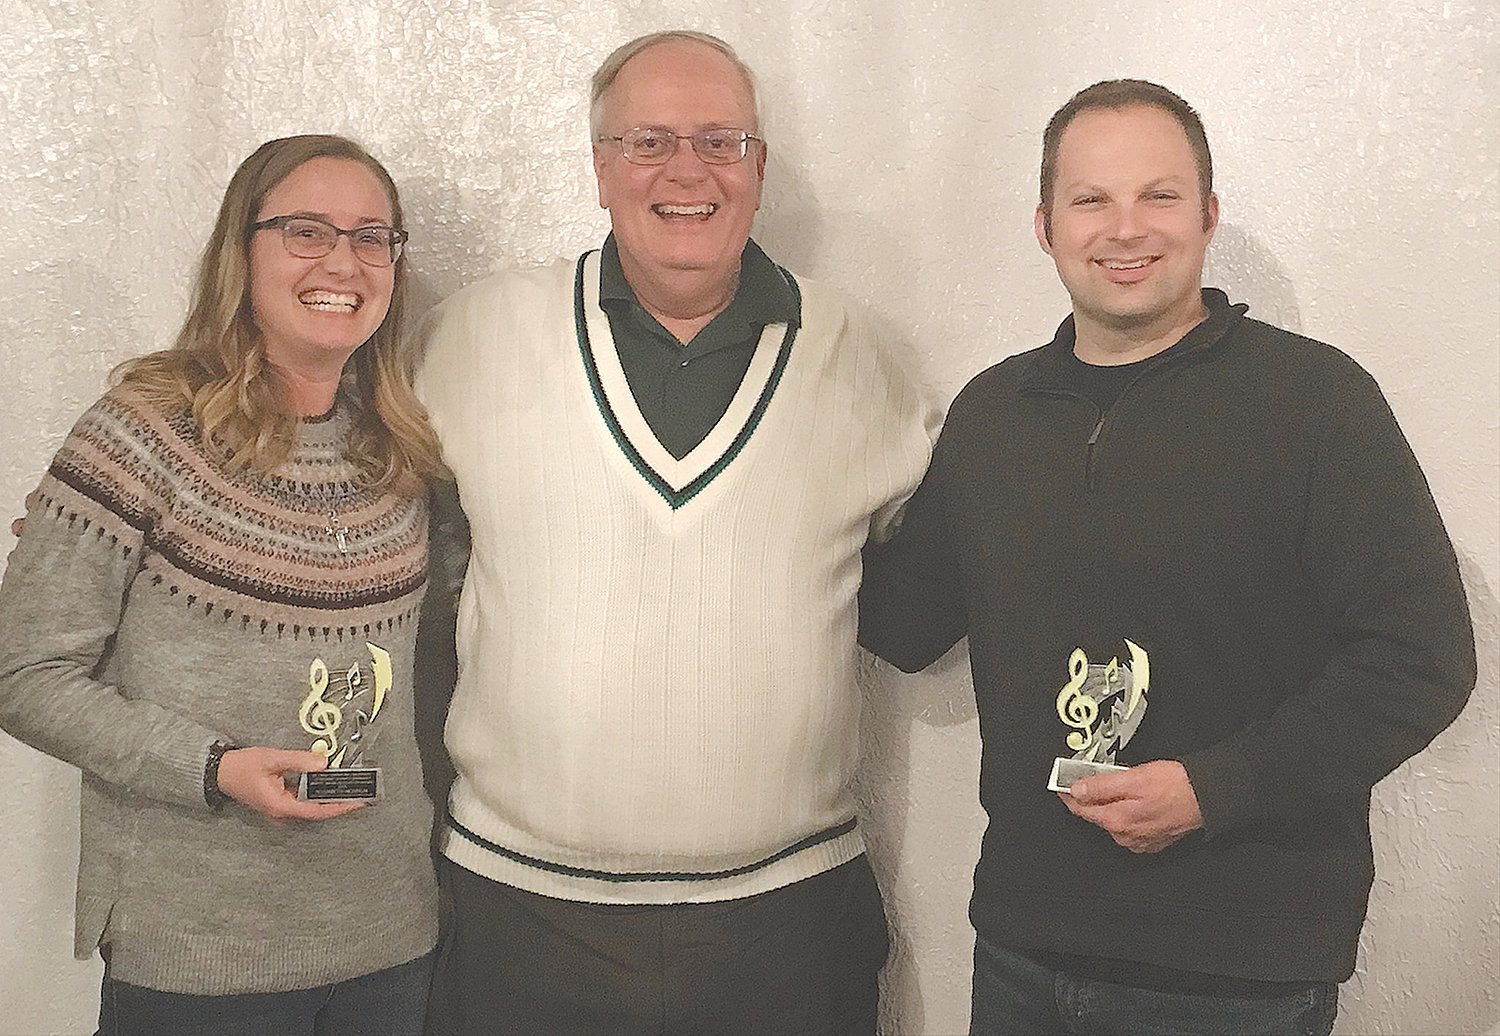 Elizabeth Newnum, left, and Andrew Simpkins, right, pose with Mark Eutsler after being honored with the 2019 Moffit Music Education Award.